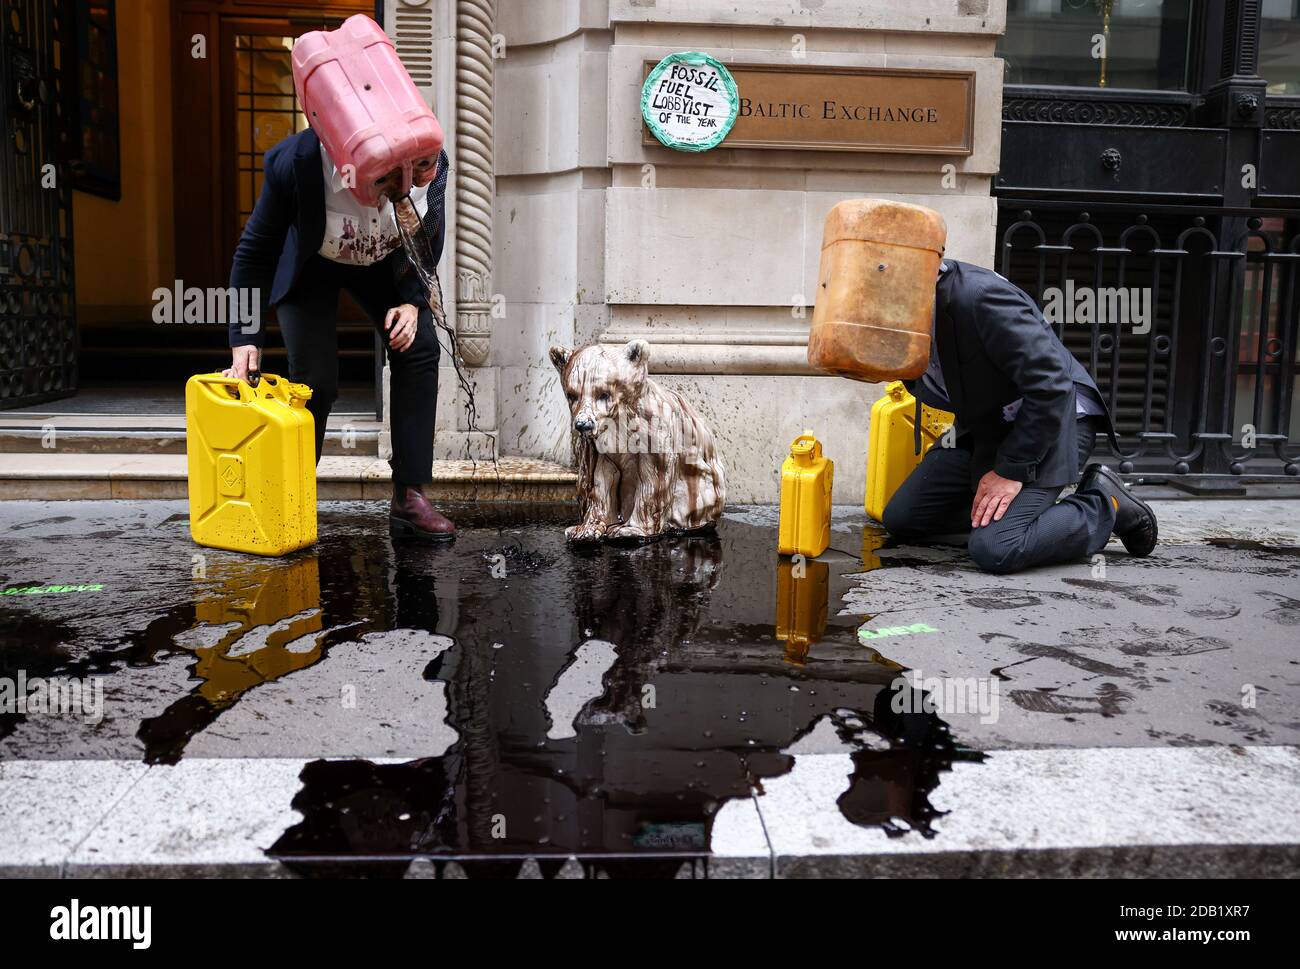 Activists from the climate action group Ocean Rebellion perform a stunt outside The Baltic Exchange building in the City Of London, in London, Britain November 16, 2020. REUTERS/Henry Nicholls Stock Photo